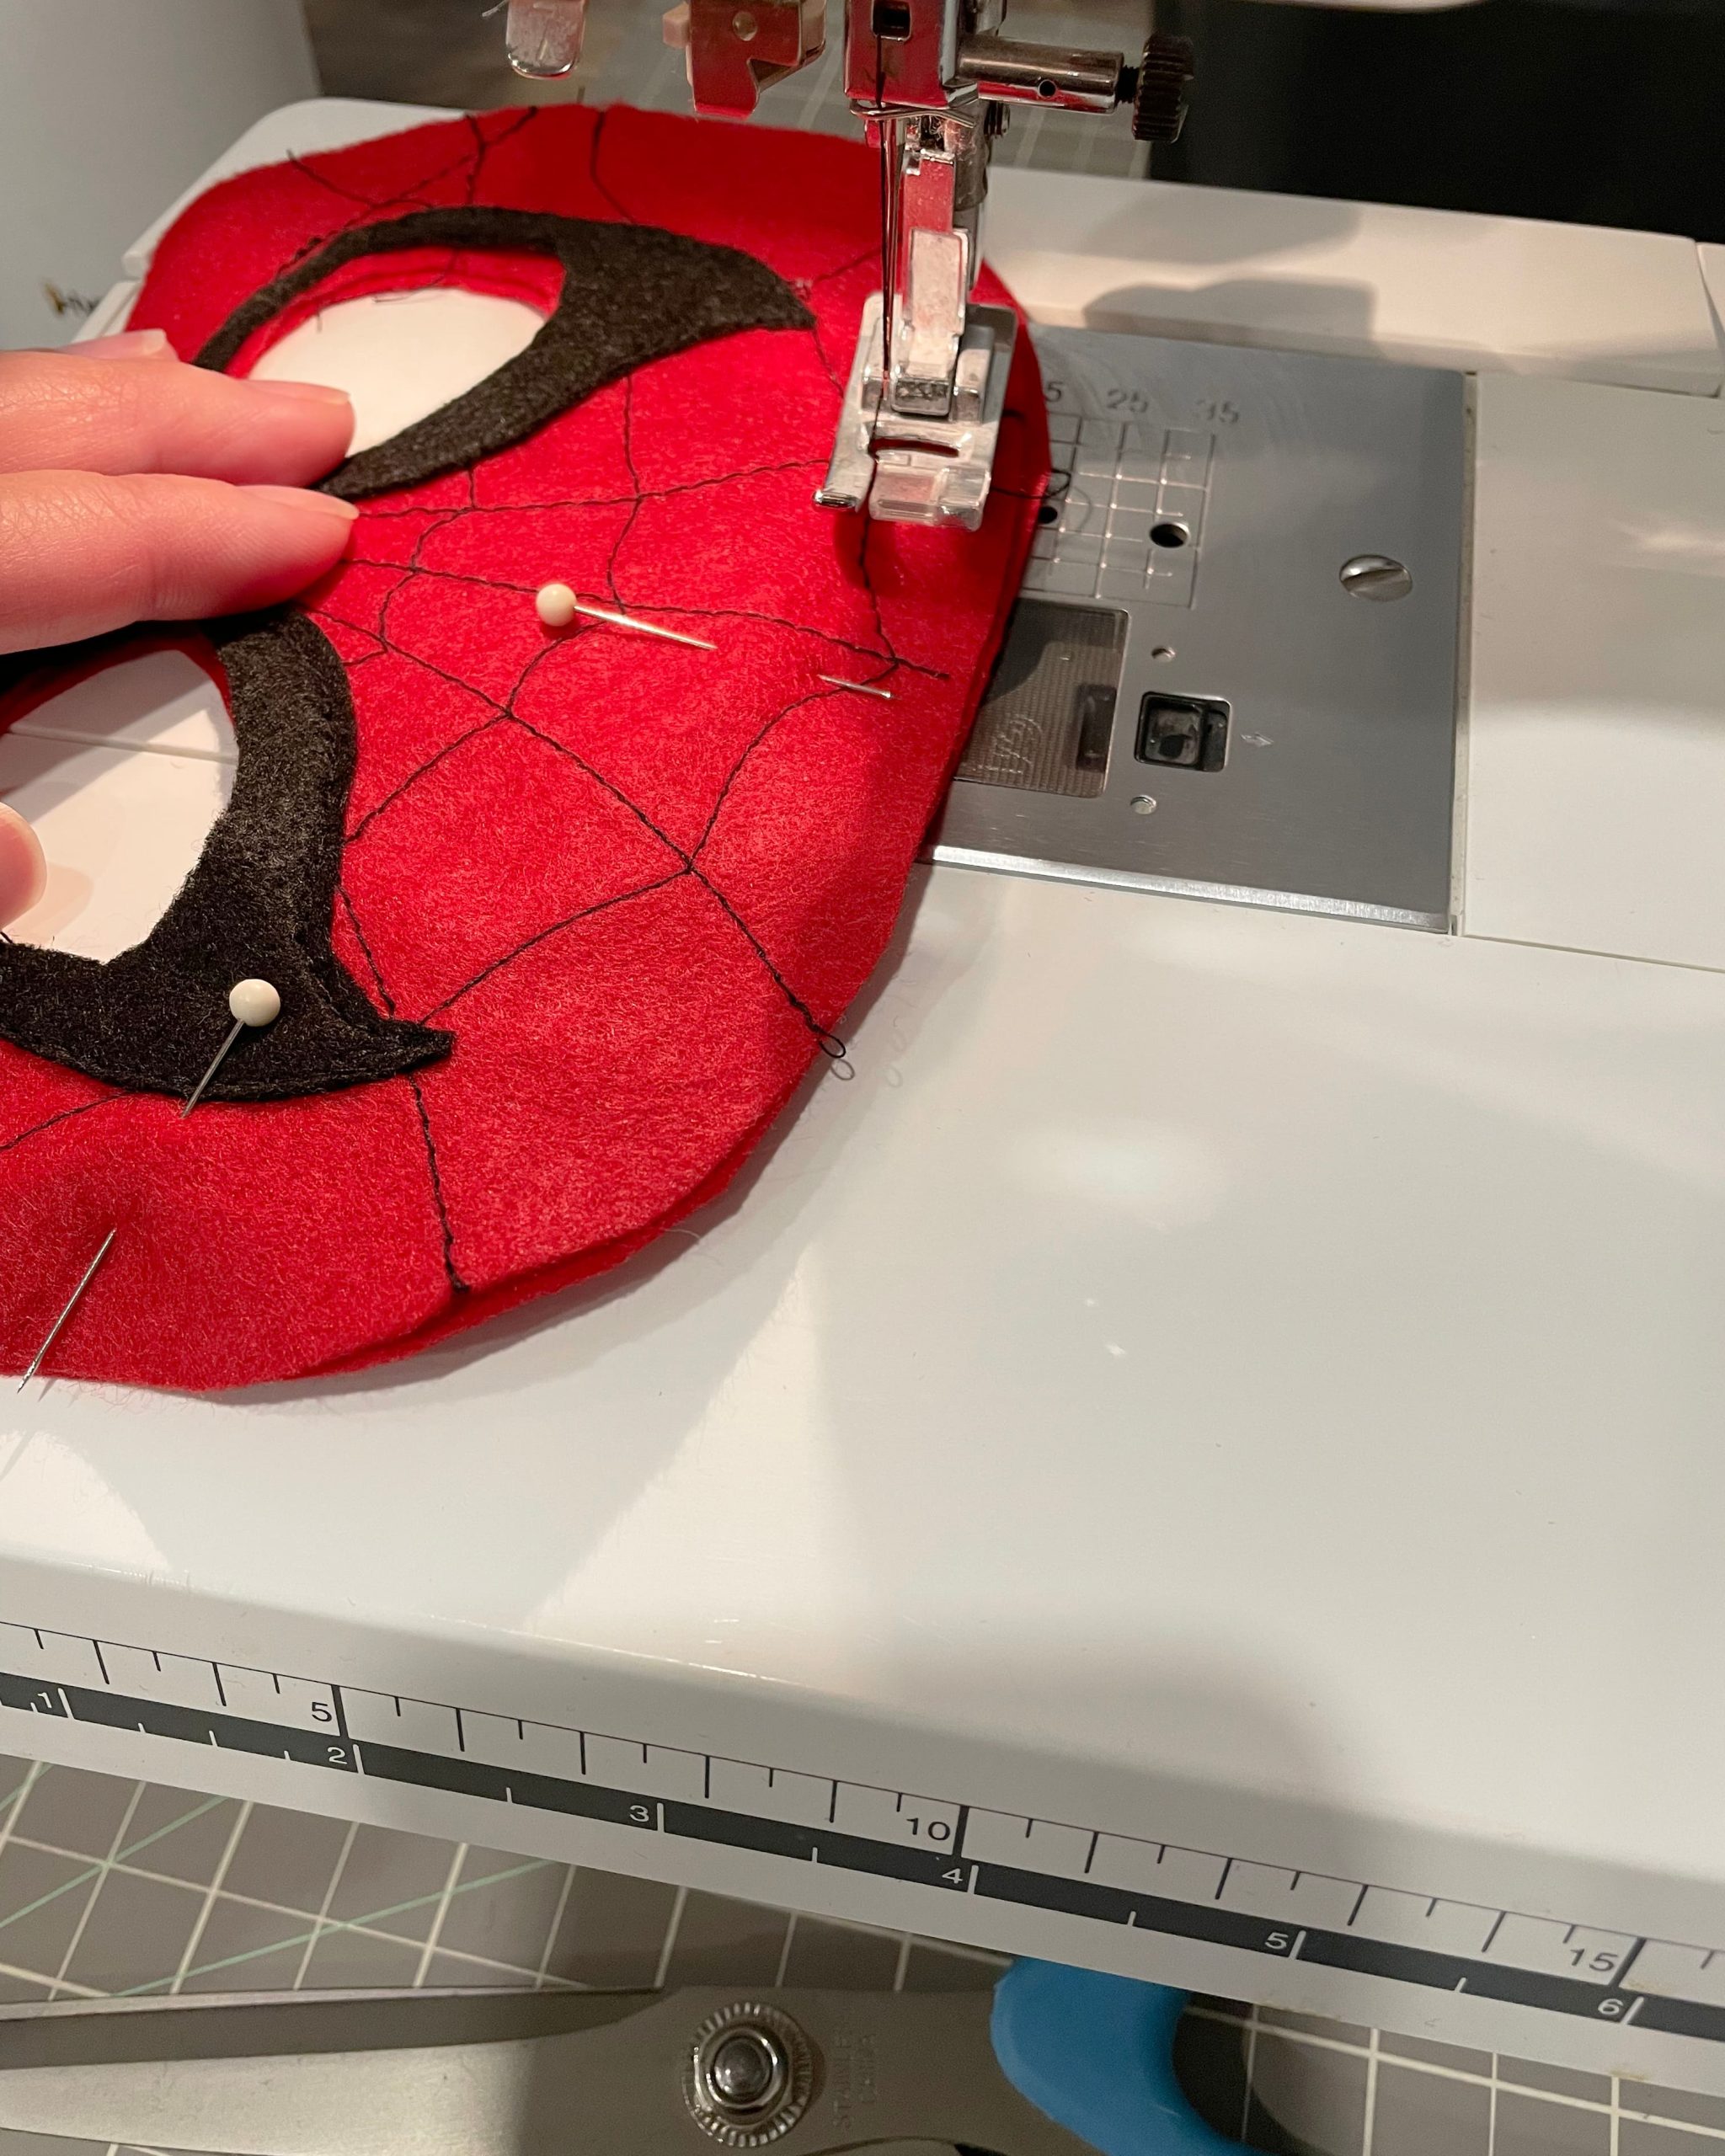 Felt Spider-Man Mask Tutorial + Free Template - In Pursuit of Chic